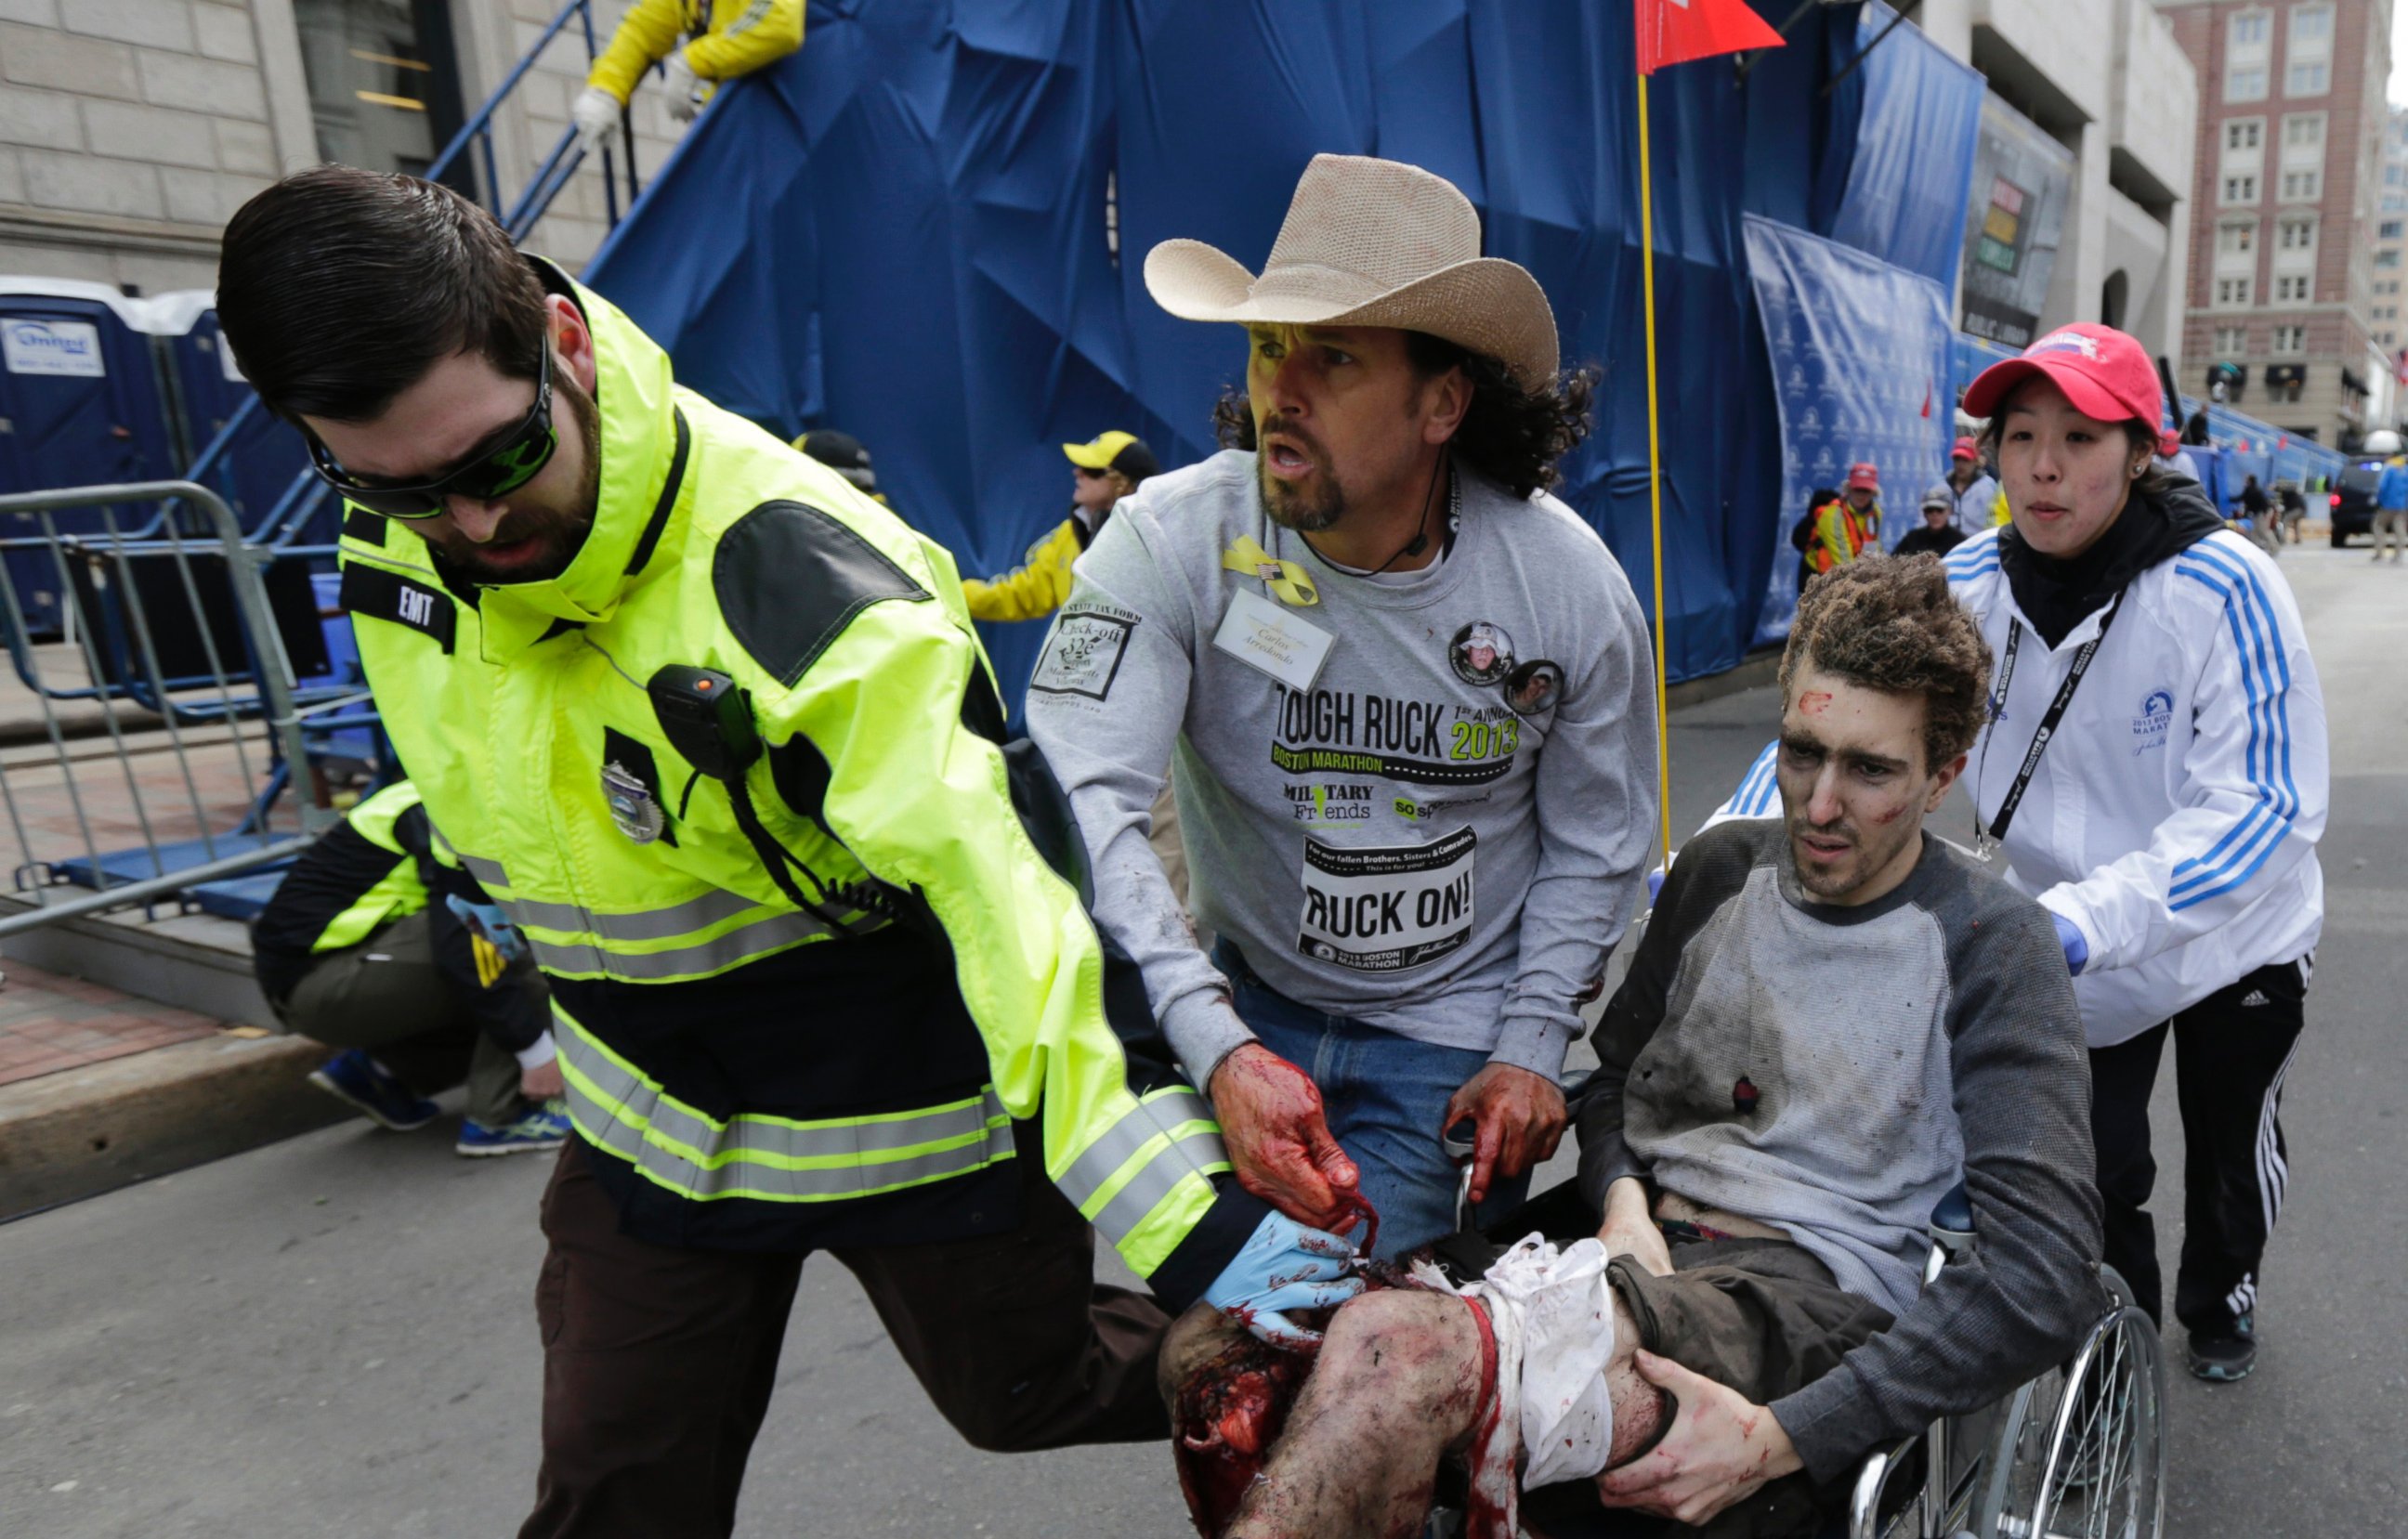 PHOTO: Boston Marathon bombing survivor Jeff Bauman is helped by Emergency Medical Services EMT Paul Mitchell, left, Carlos Arredondo, center, and Devin Wang, right, after he was injured in one of two explosions in Boston, April 15, 2013.